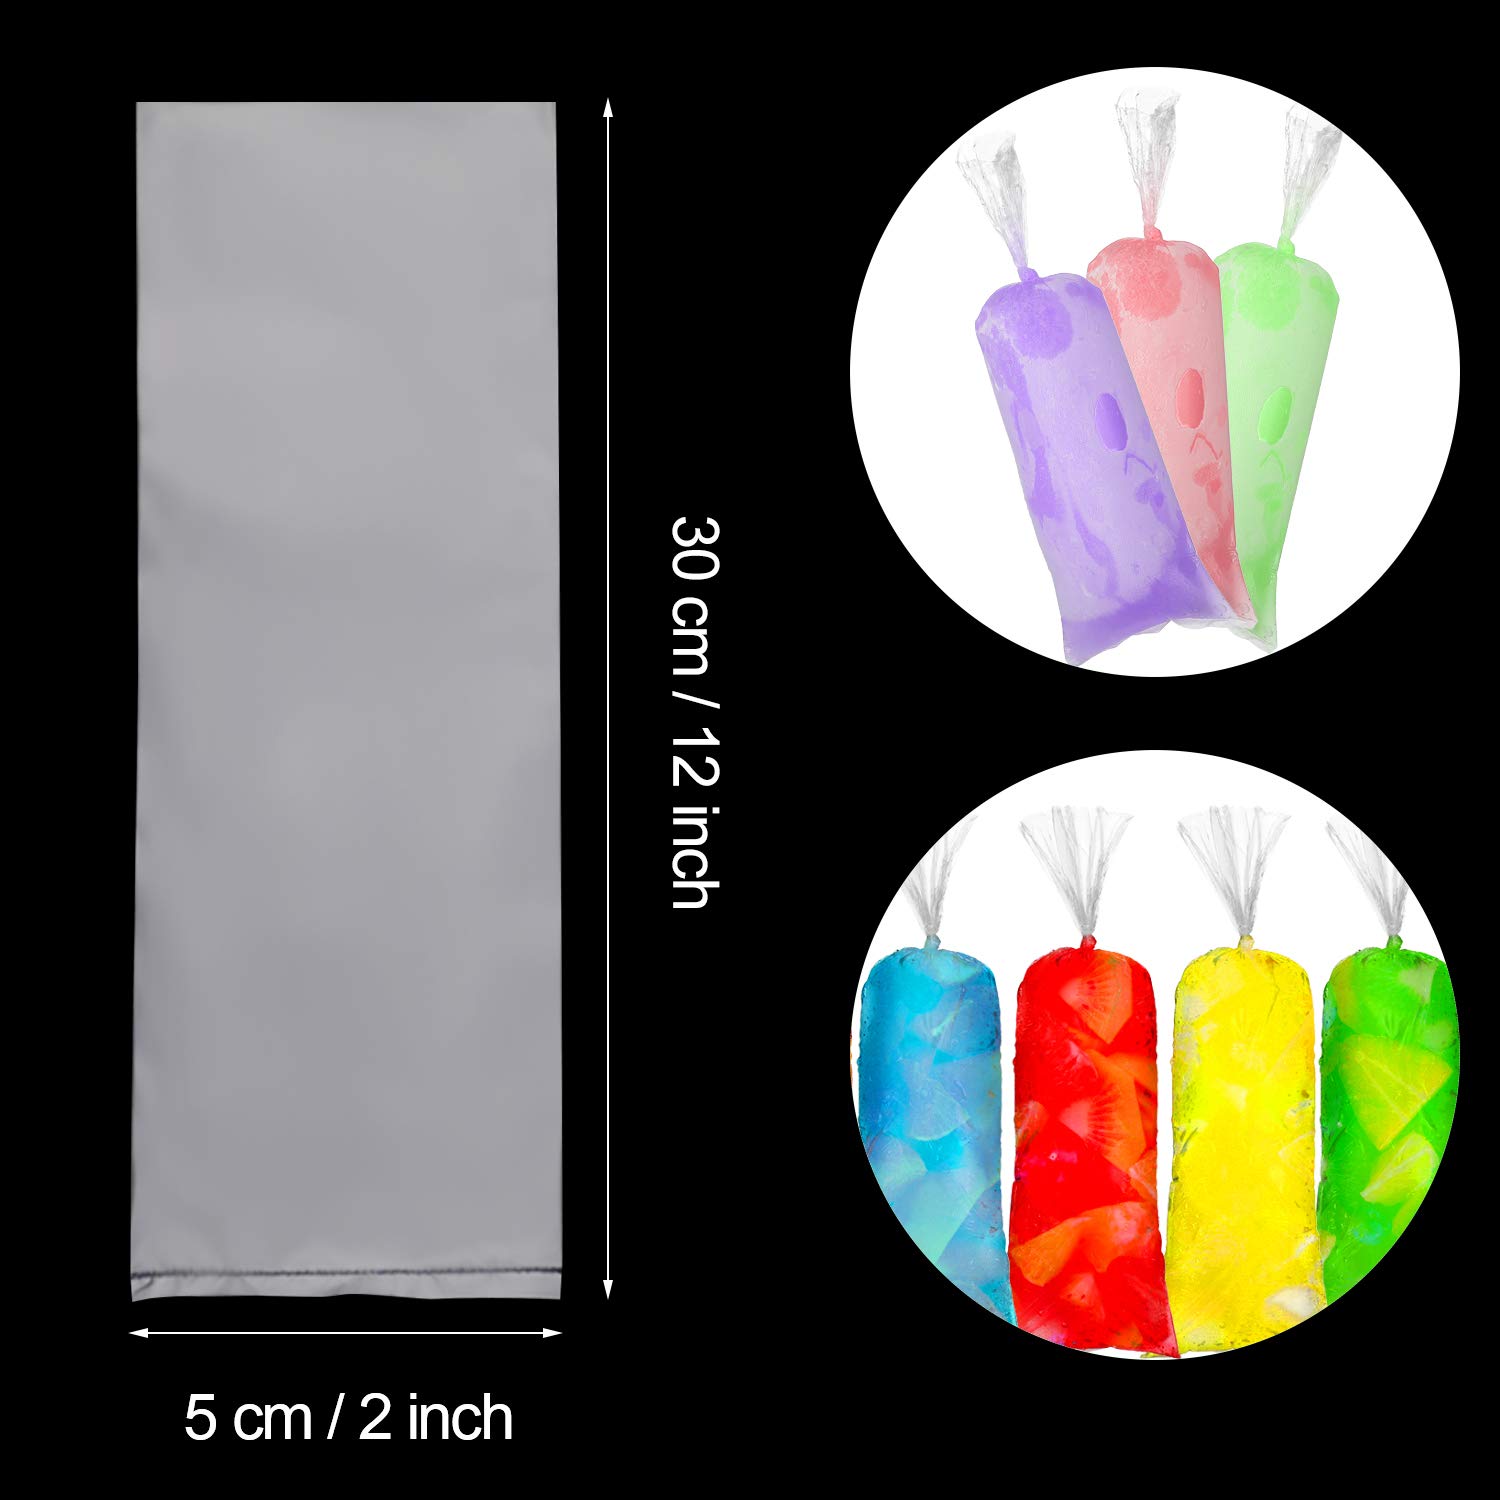 Ice Bags Disposable Ice Pop Mold Bags Plastic Ice Candy Bags for Making Ice Pop Yogurt Candy Freeze Pops (120)